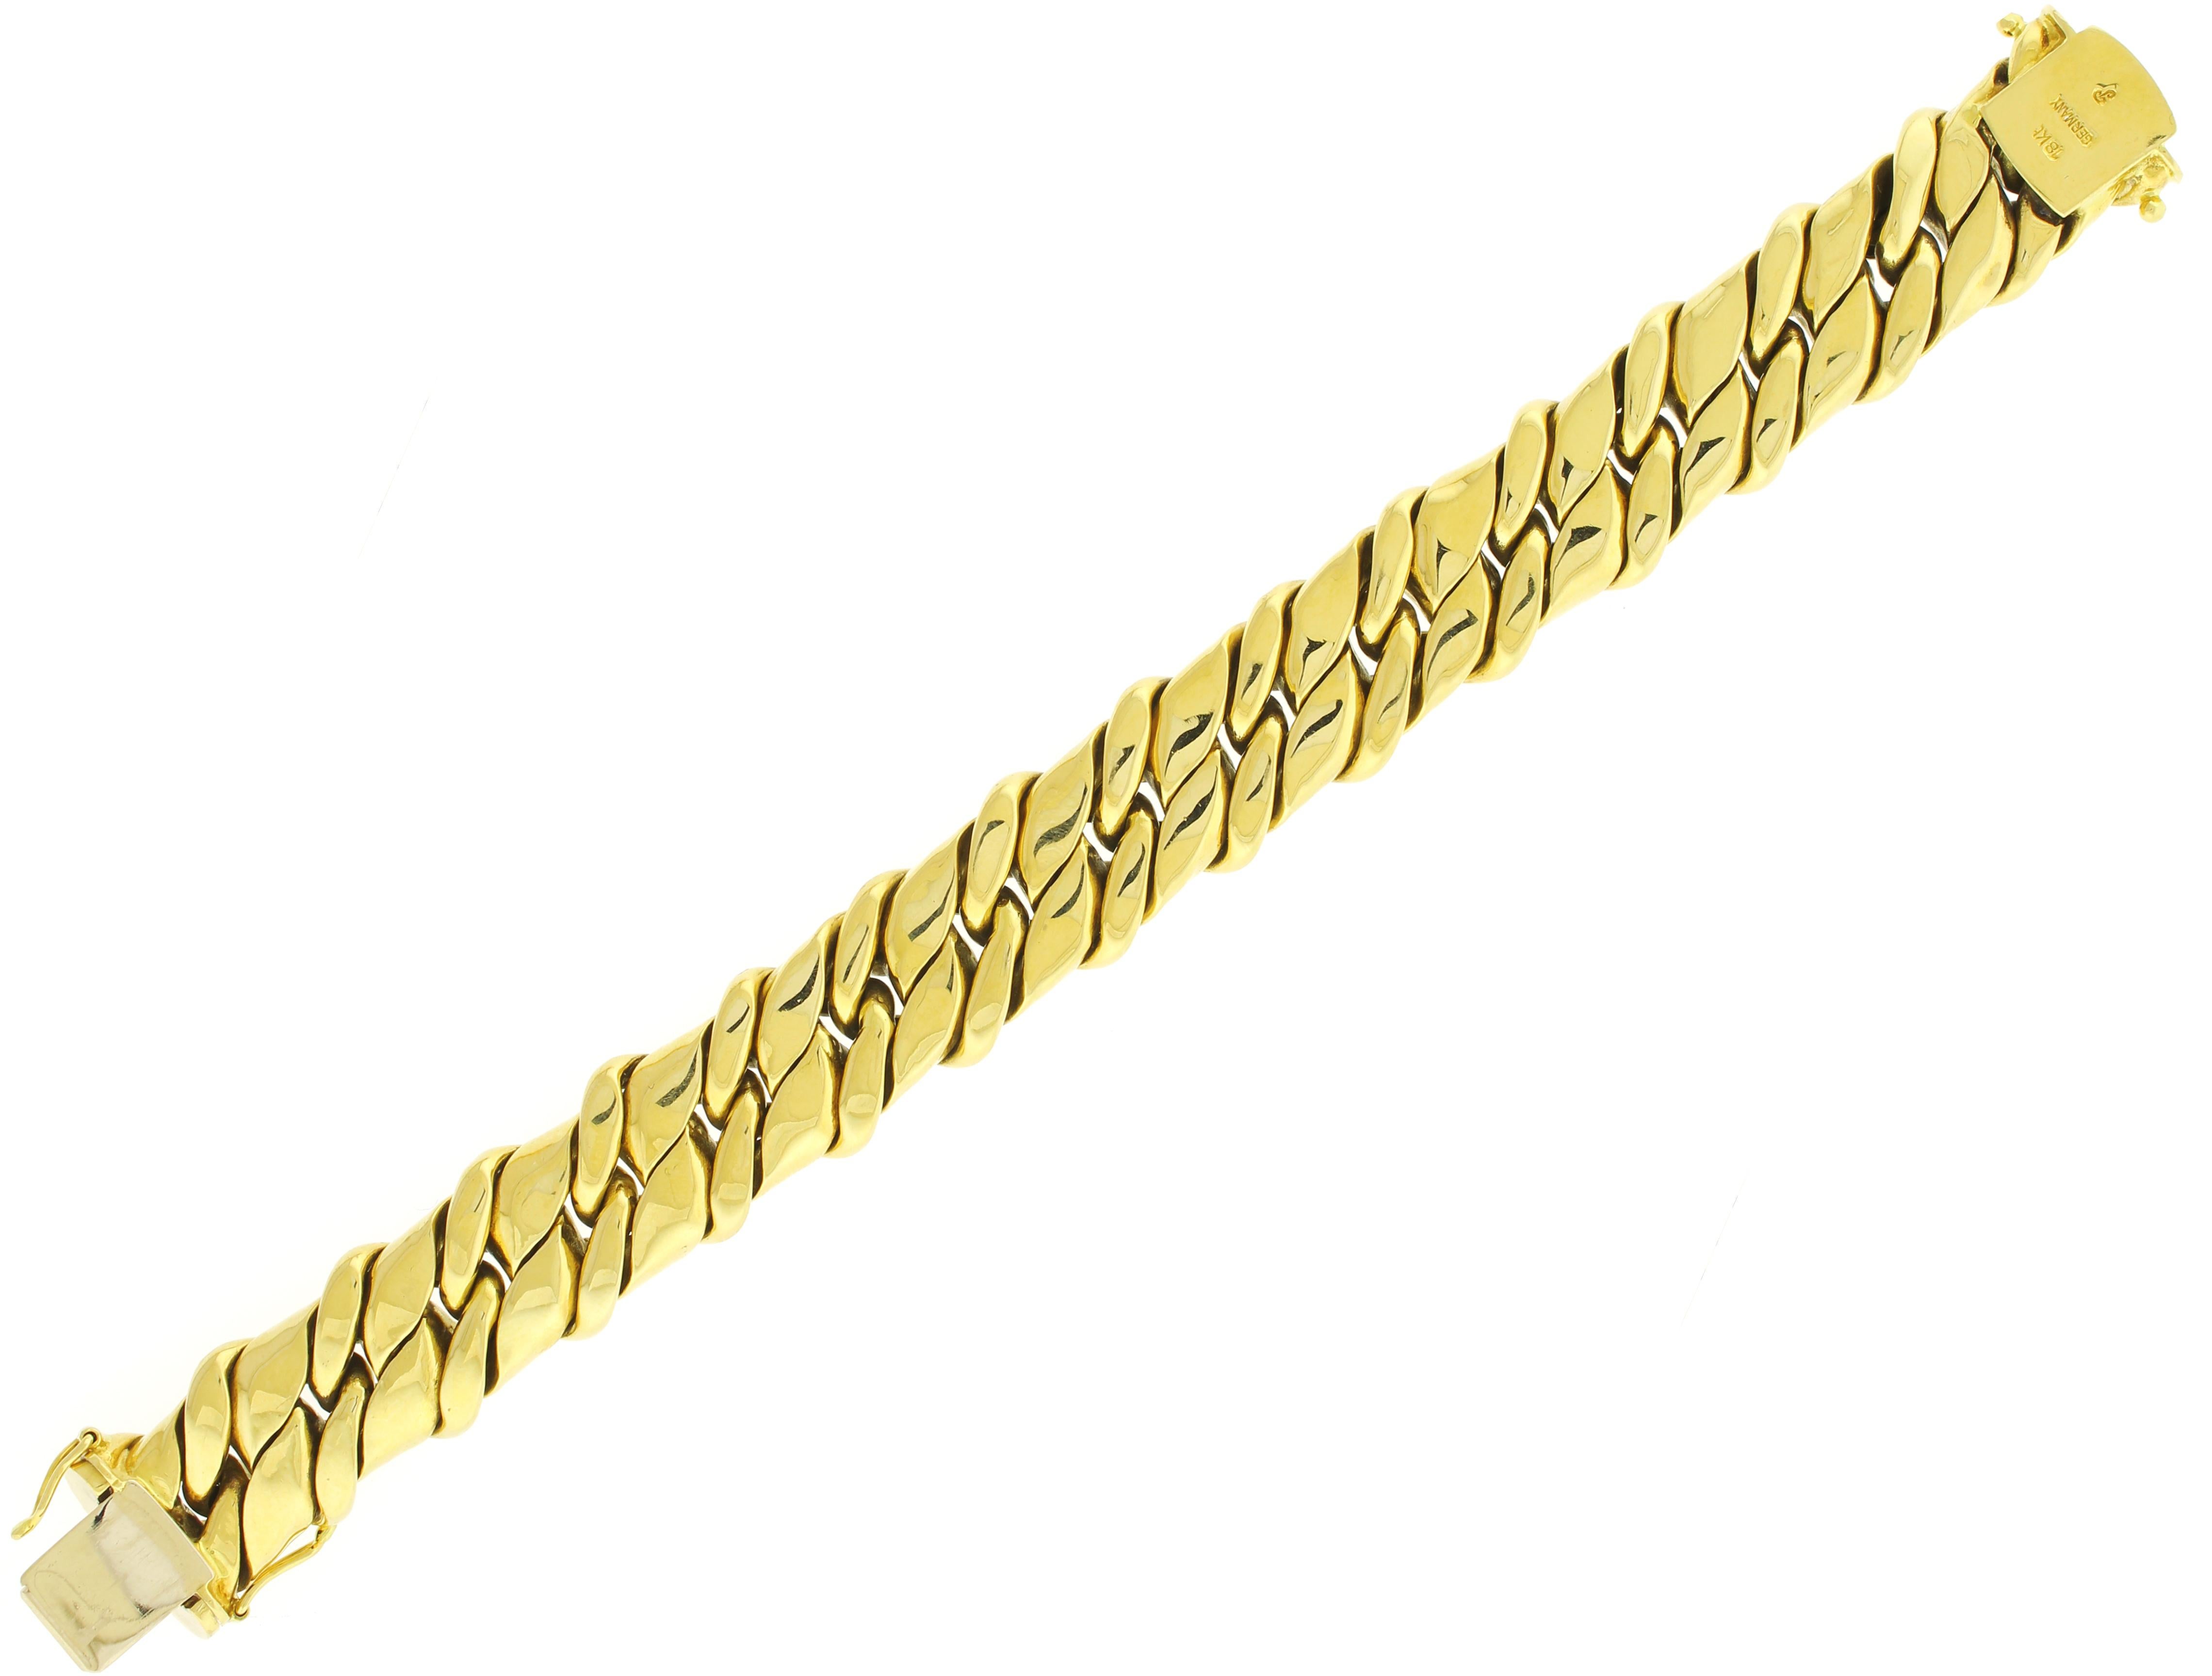 ♦ Designer: Abel and Zimmerman for Pampillonia Jewelers
♦ Circa: 1980s
♦ Length: 7 1/2 inches
♦ Width: 5/8inch
♦ Metal: 18Kt Yellow Gold
♦ Packaging: Pampillonia Presentation Box
♦ Condition: Excellent, pre-owned.